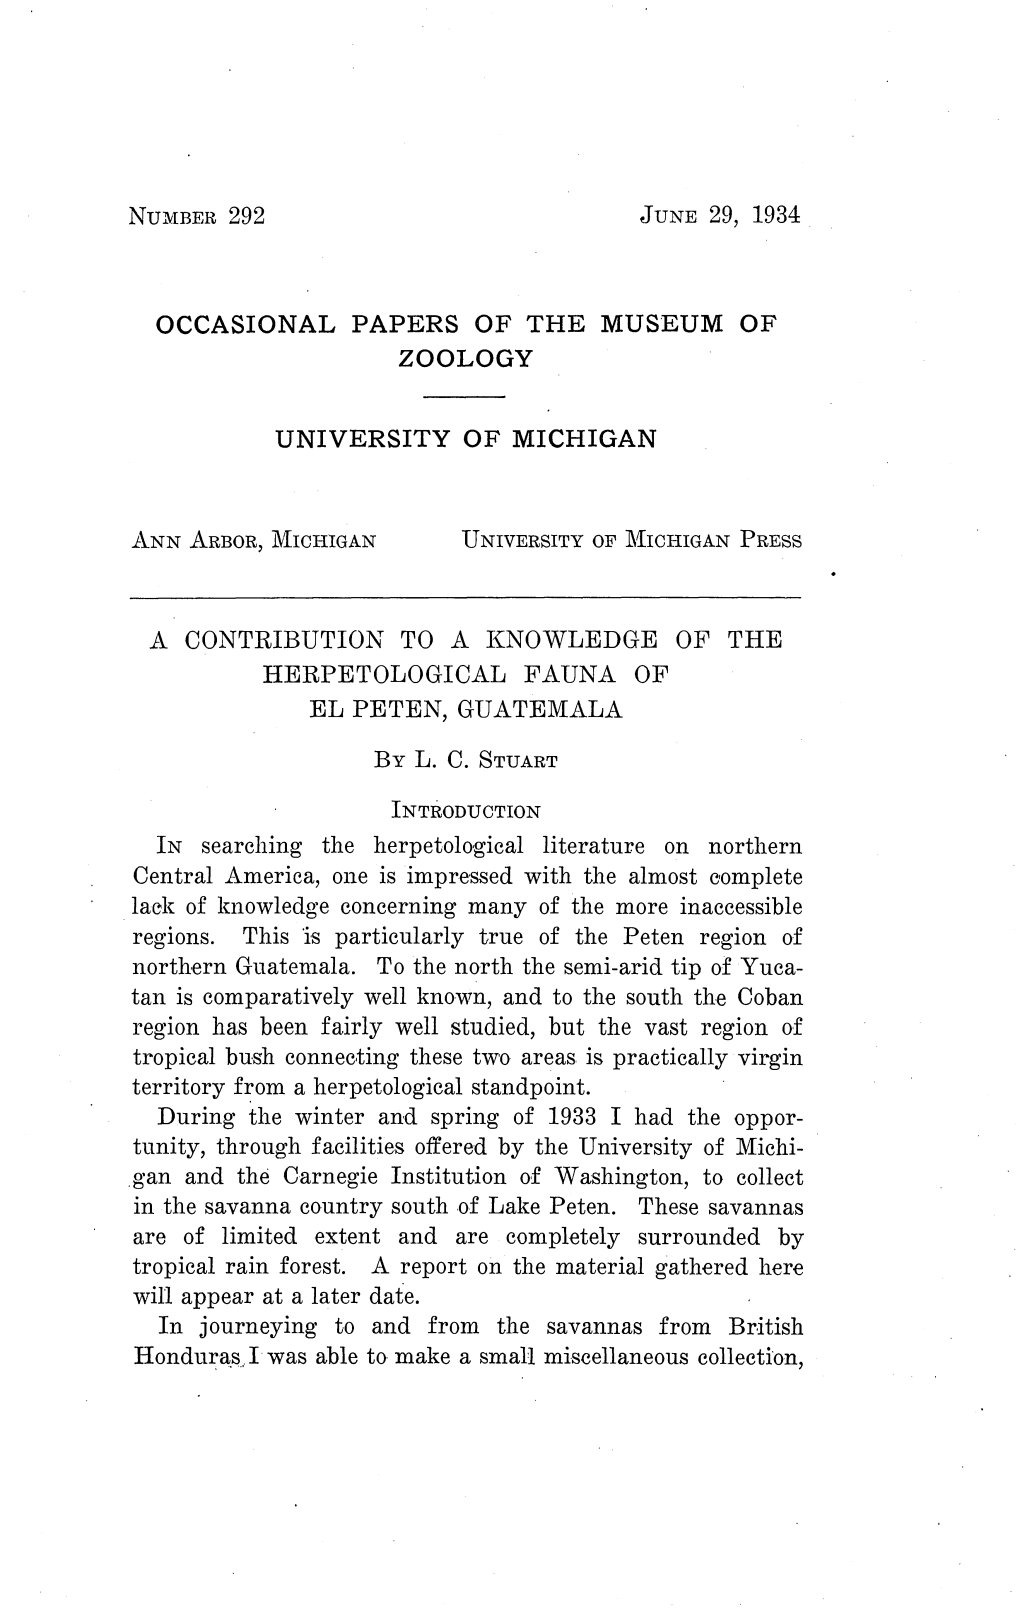 Occasional Papers of the Museum of Zoology University of Michigan Introduction